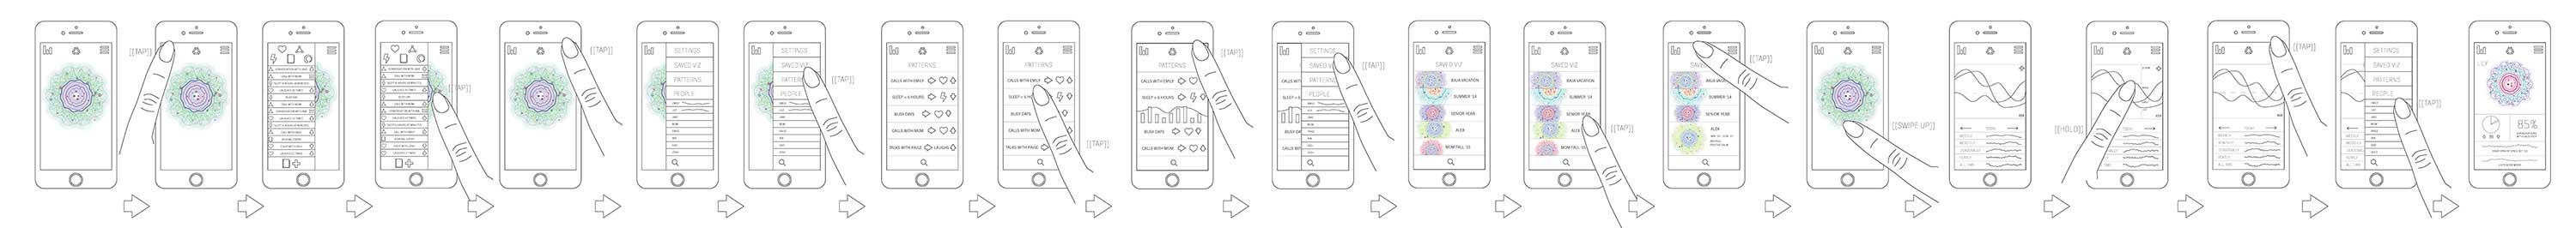 wireframes with gestures